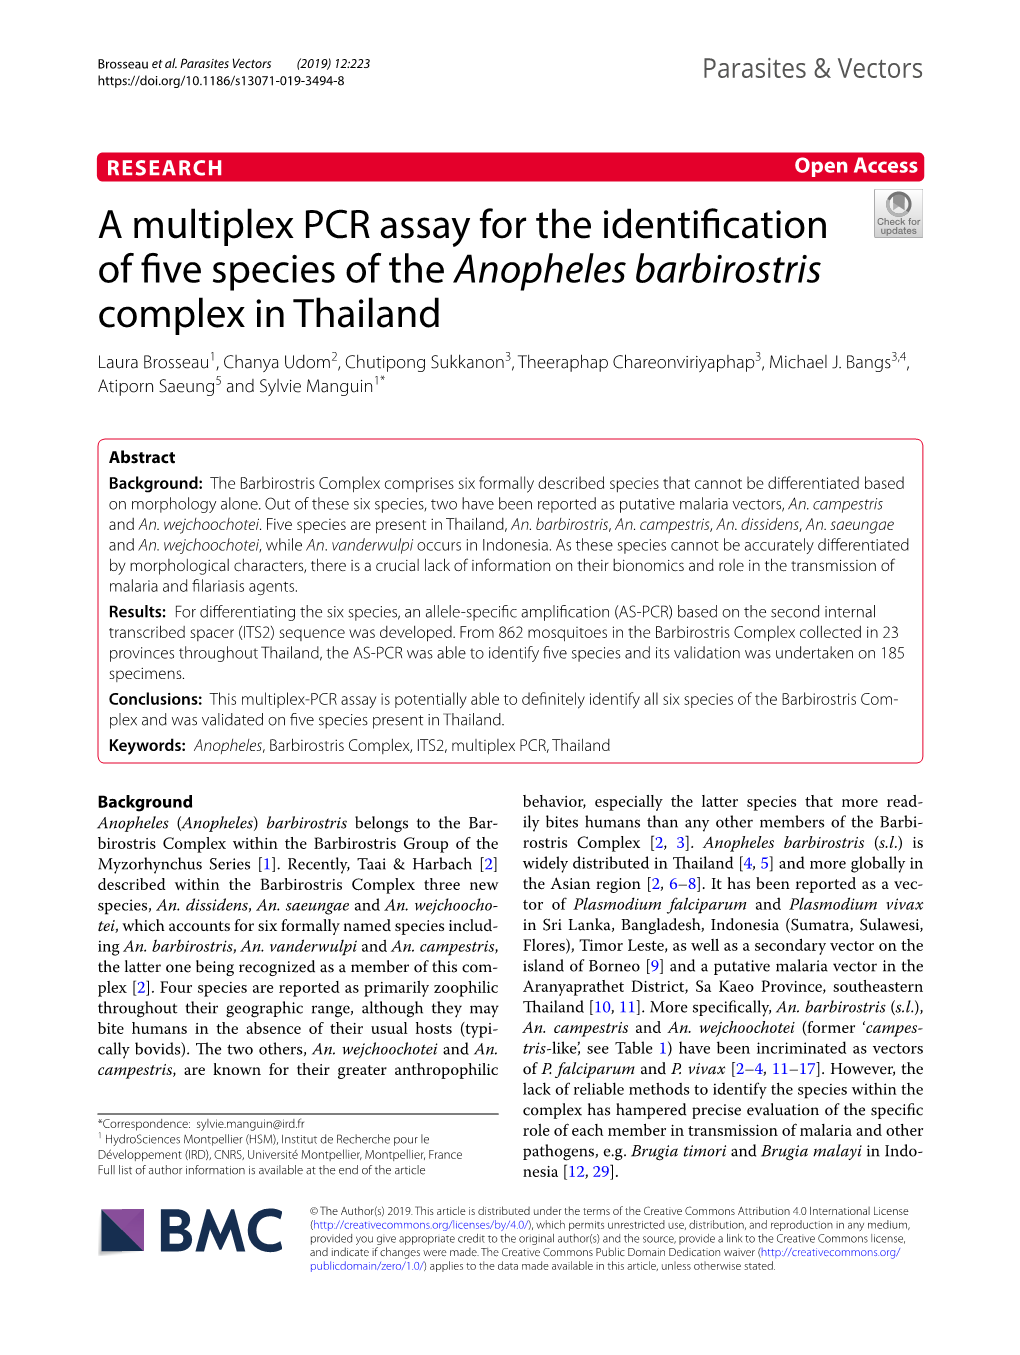 A Multiplex PCR Assay for the Identification of Five Species of the Anopheles Barbirostris Complex in Thailand